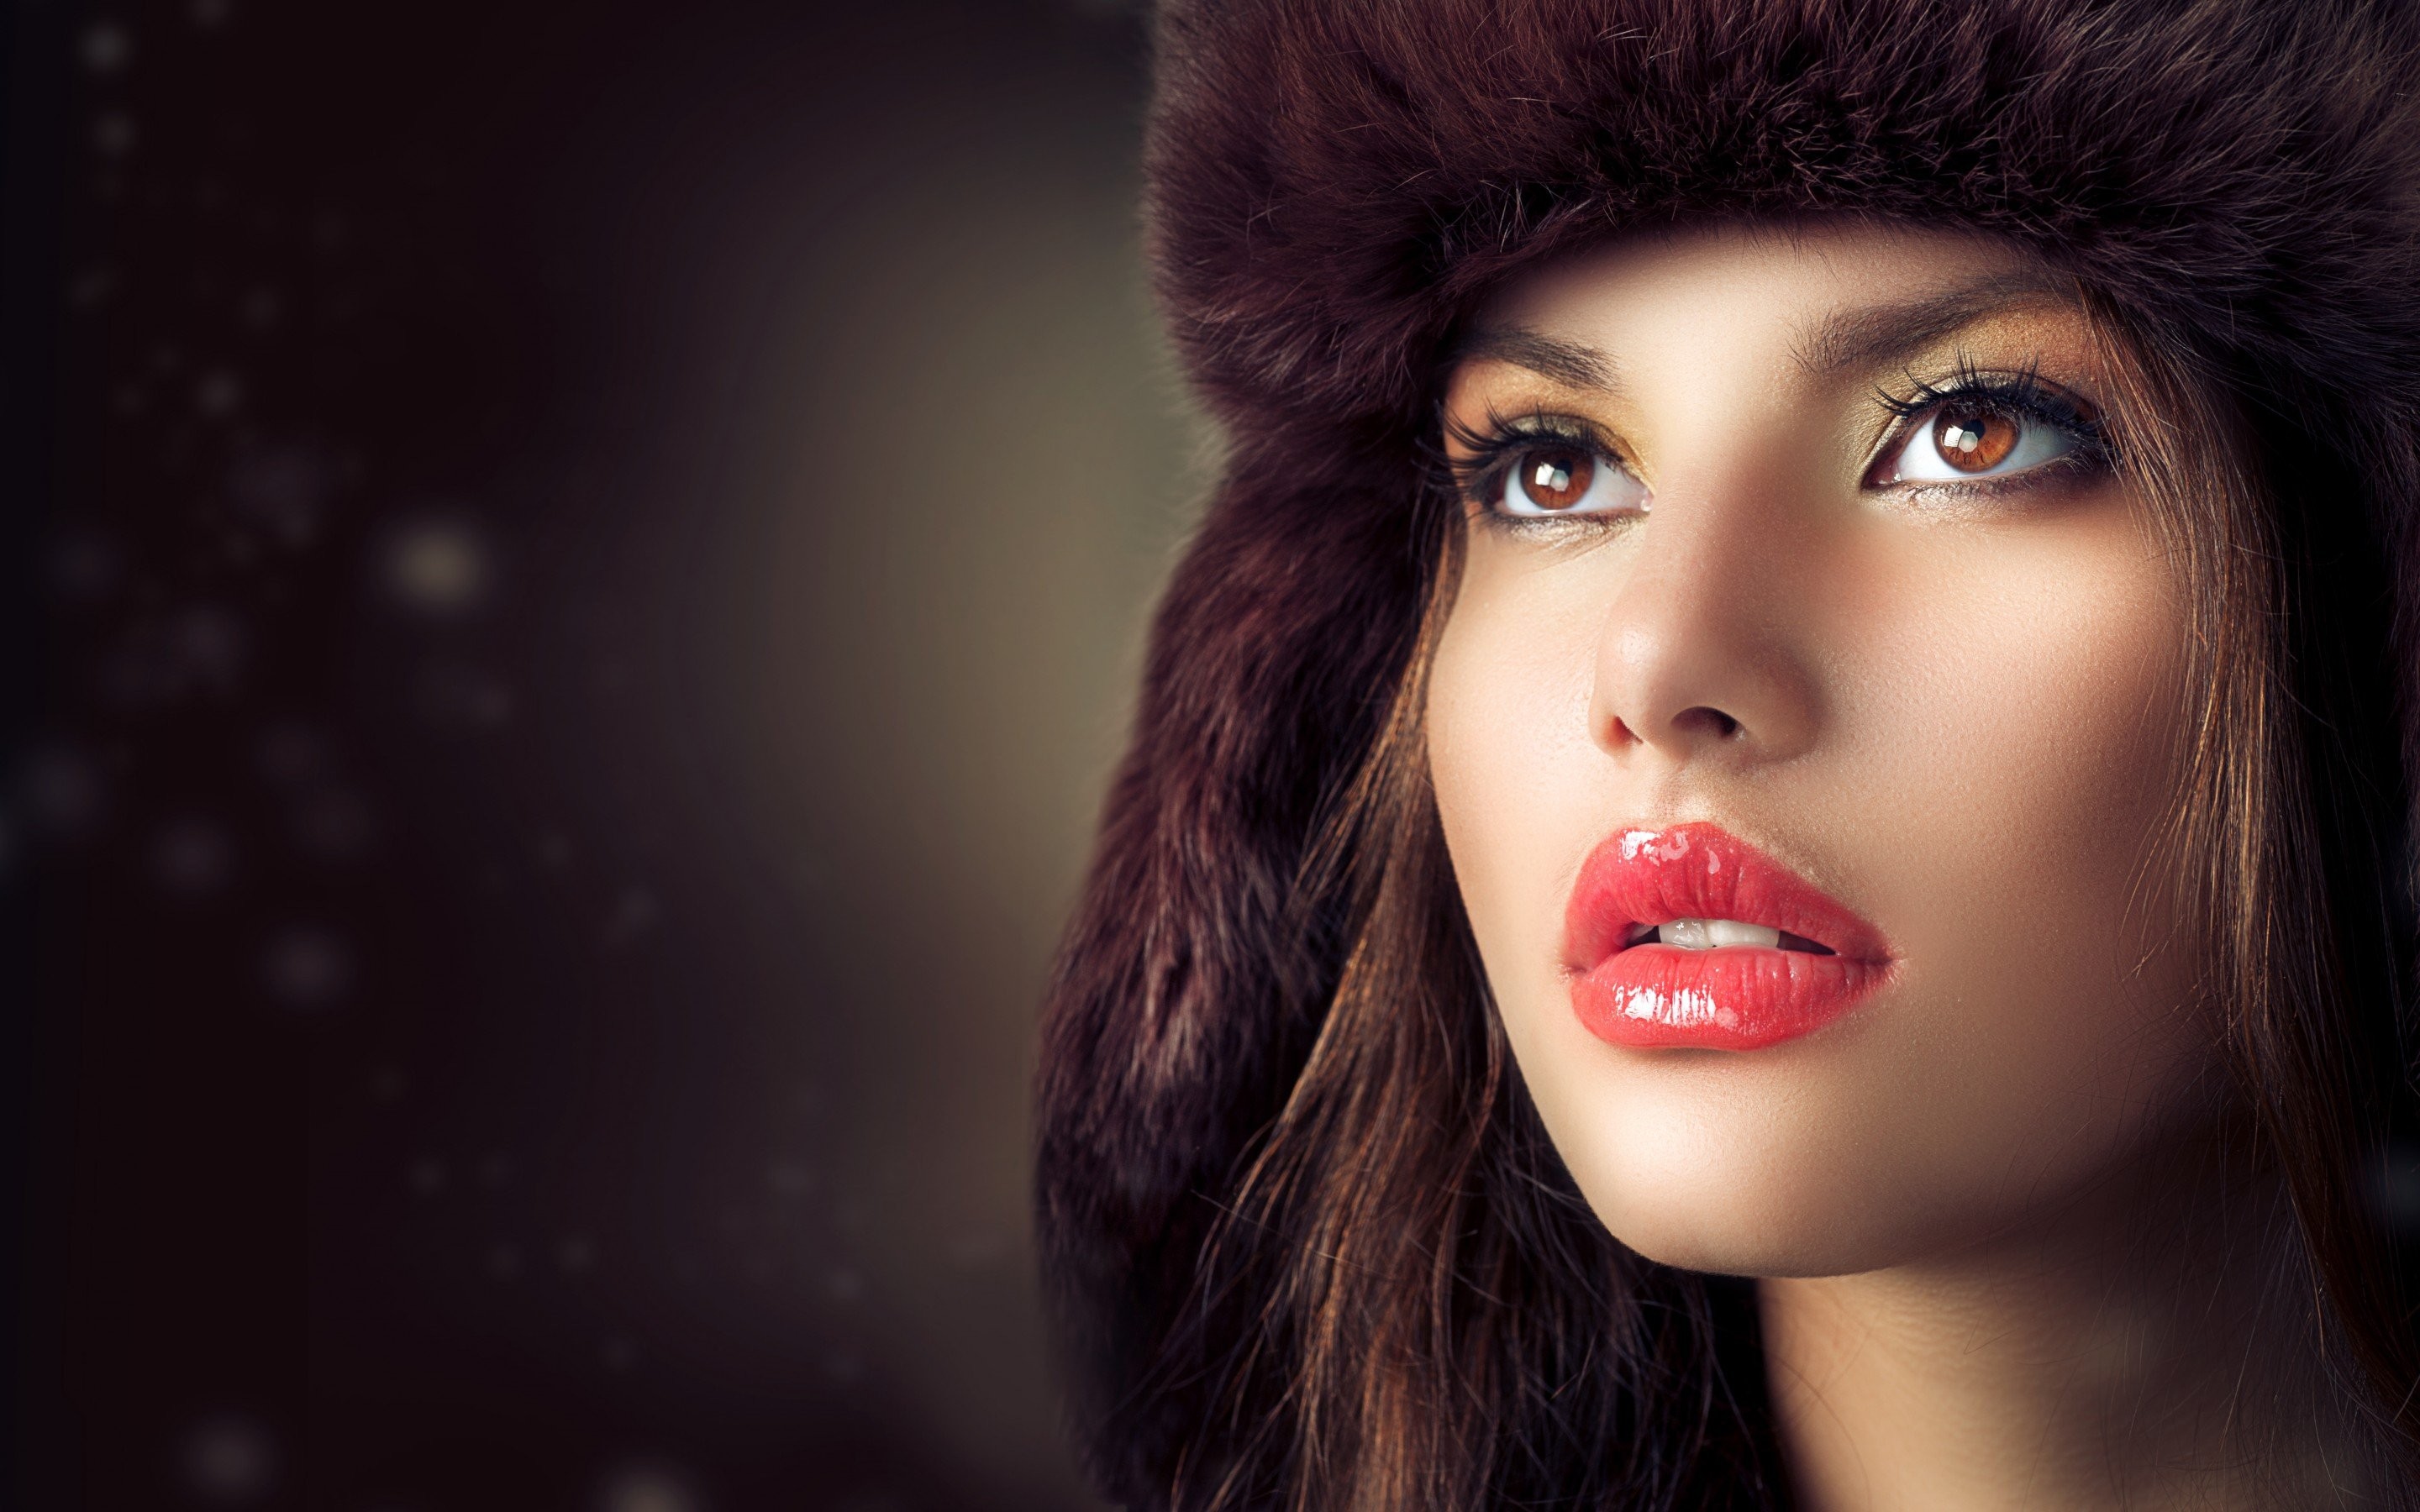 women model brunette long hair face open mouth red lipstick brown eyes airbrushed funny hats juicy lips Wallpaper